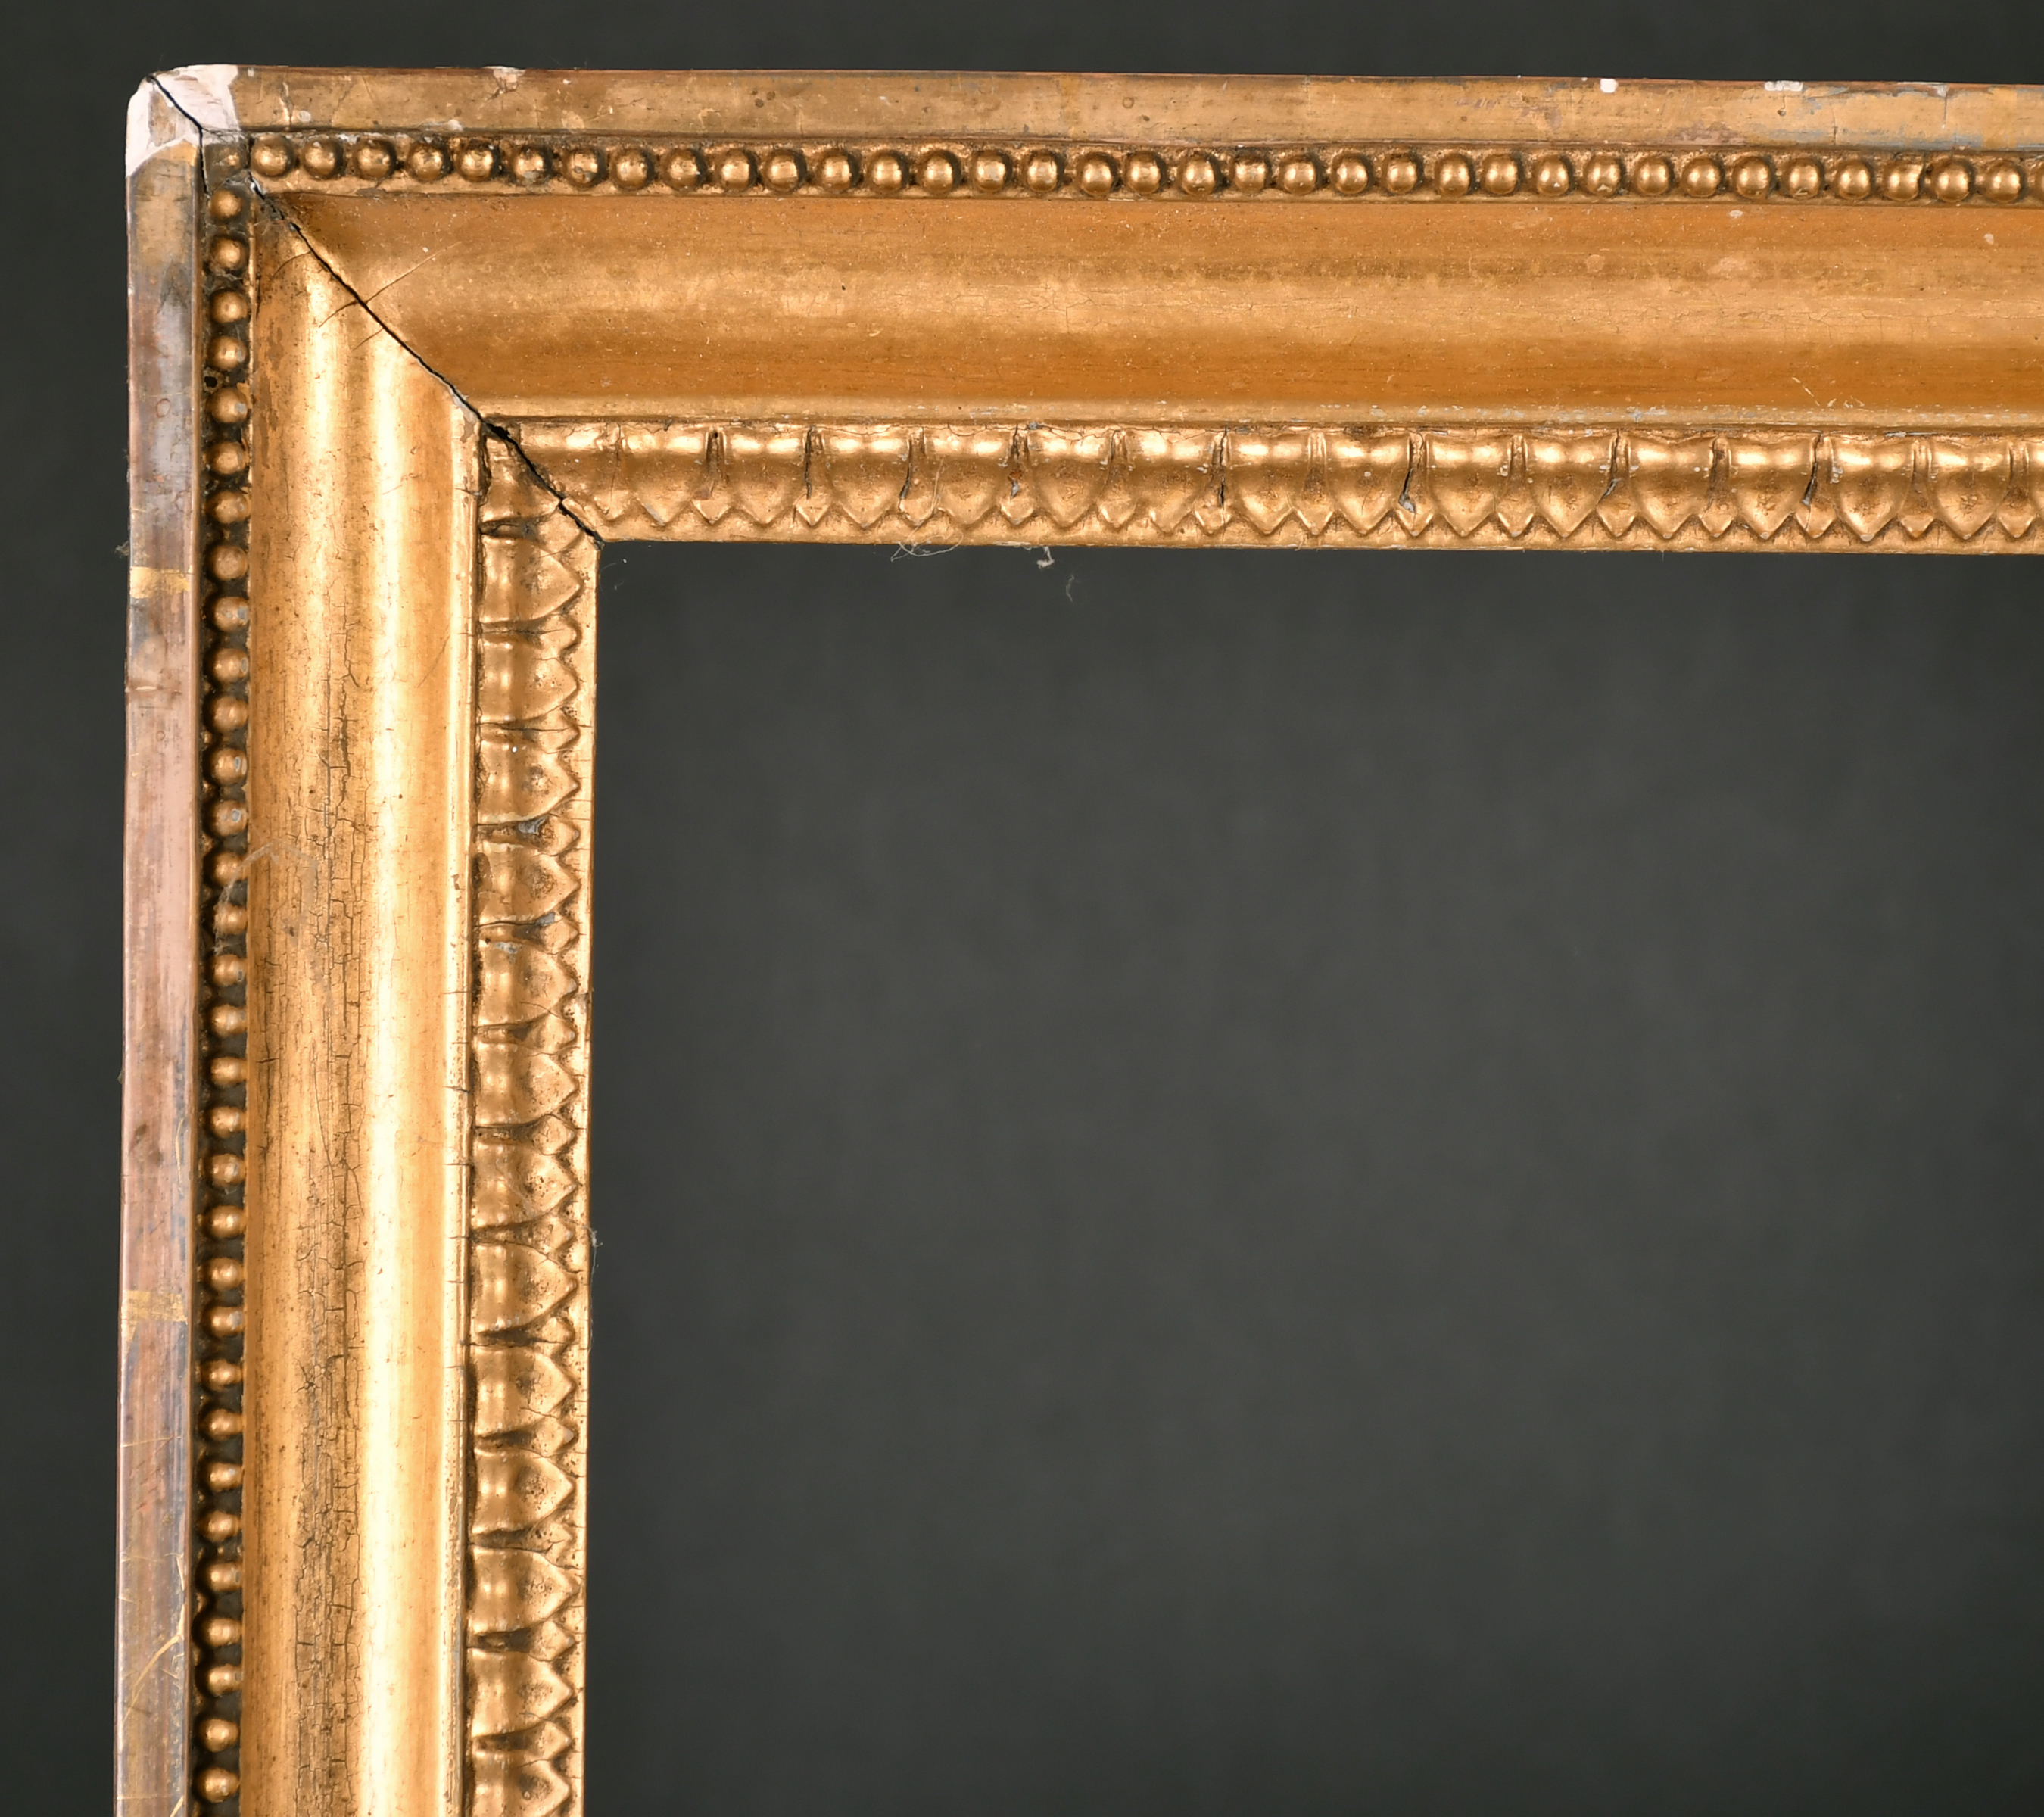 Early 19th Century English School. A Carved Giltwood Frame, with a tongue inner edge, rebate 26" x